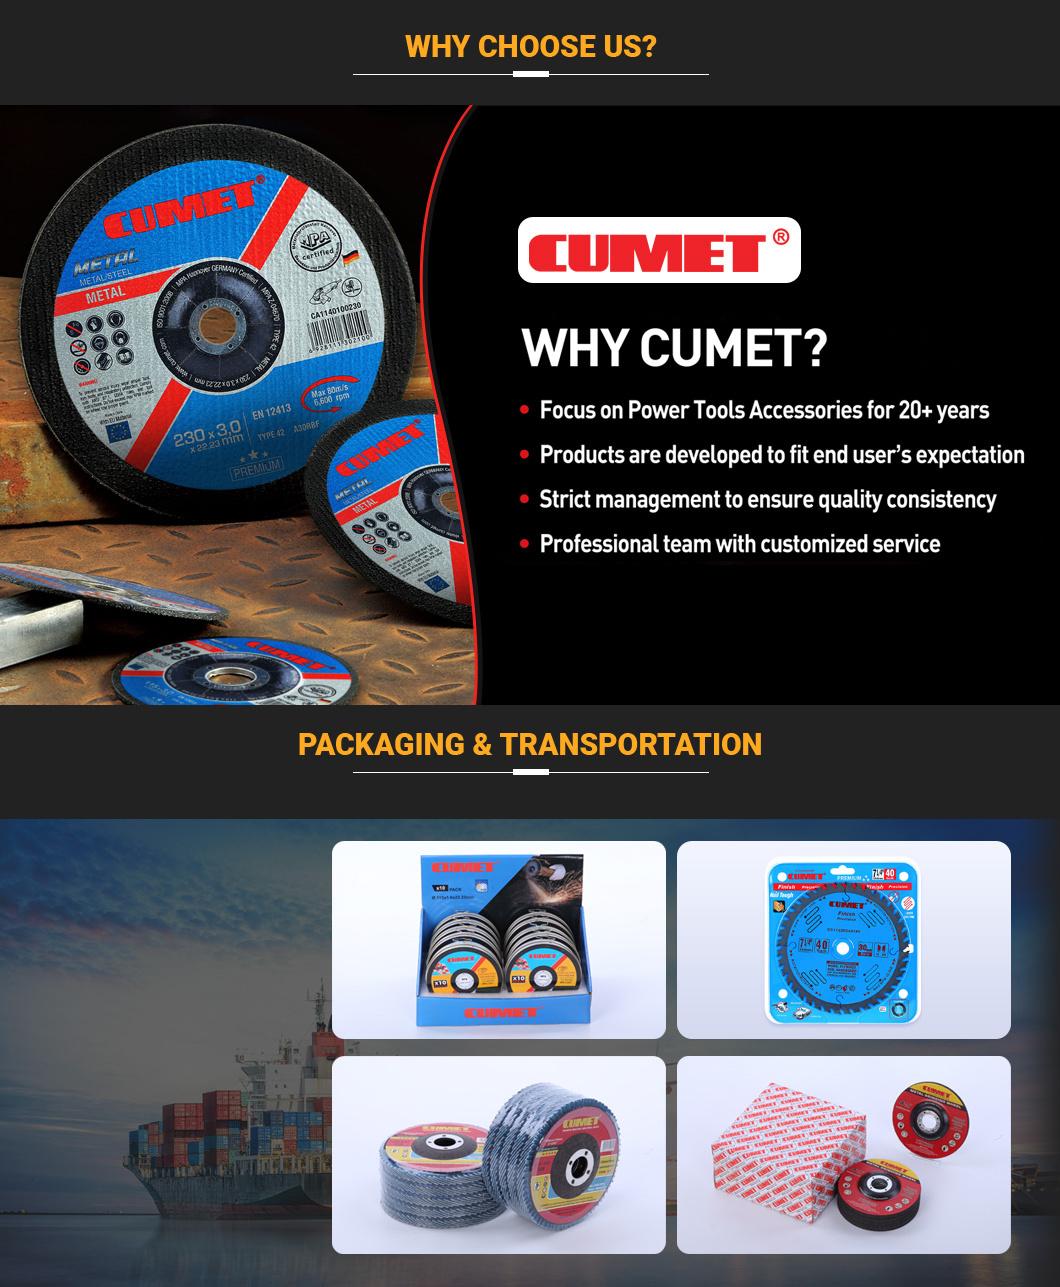 Cumet 4′ ′ Cut off Wheel for Metal Abrasive with MPa Certificate